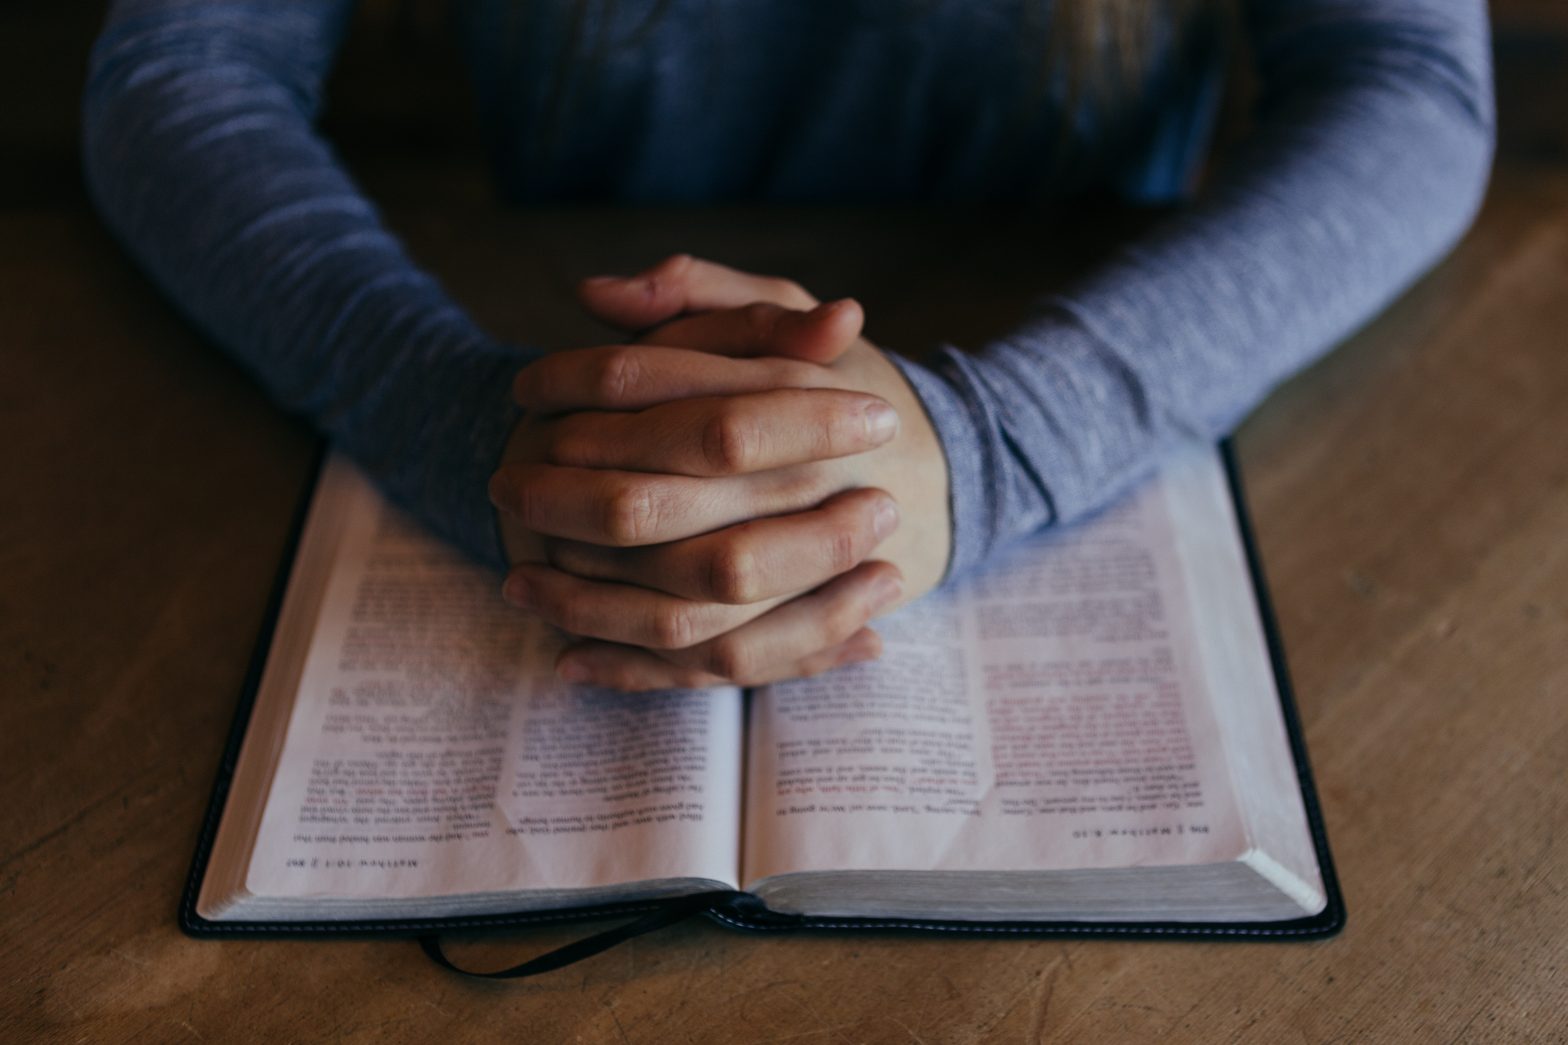 Hands with enclosed fingers rest on an open Bible.